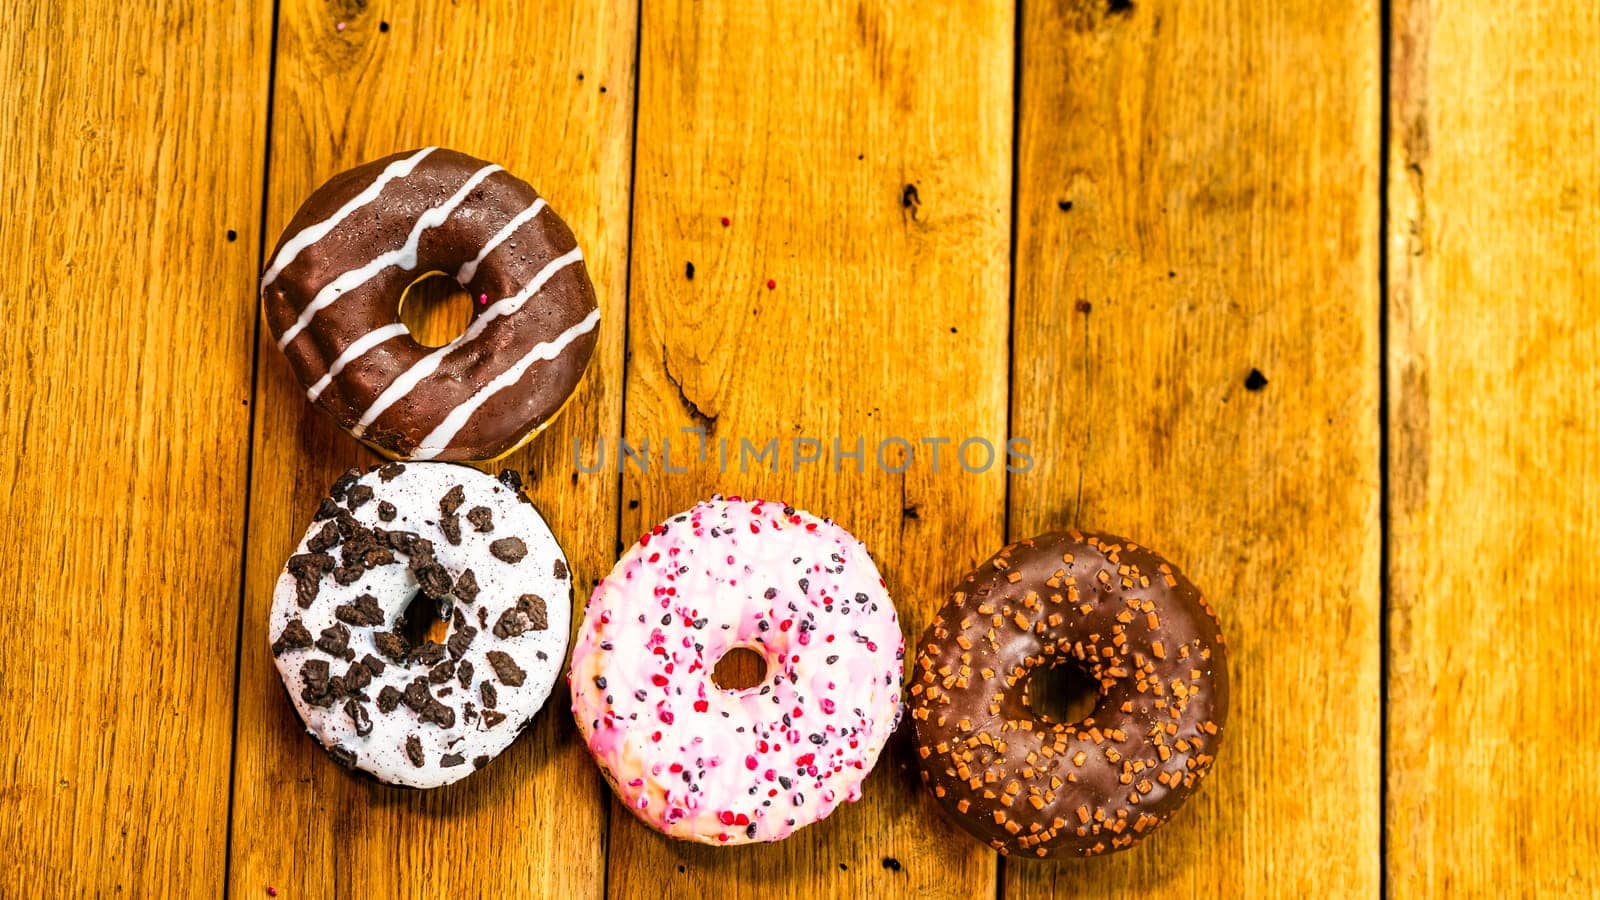 Colorful donuts on wooden table. Sweet icing sugar food with glazed sprinkles, doughnut with chocolate frosting. Top view with copy space